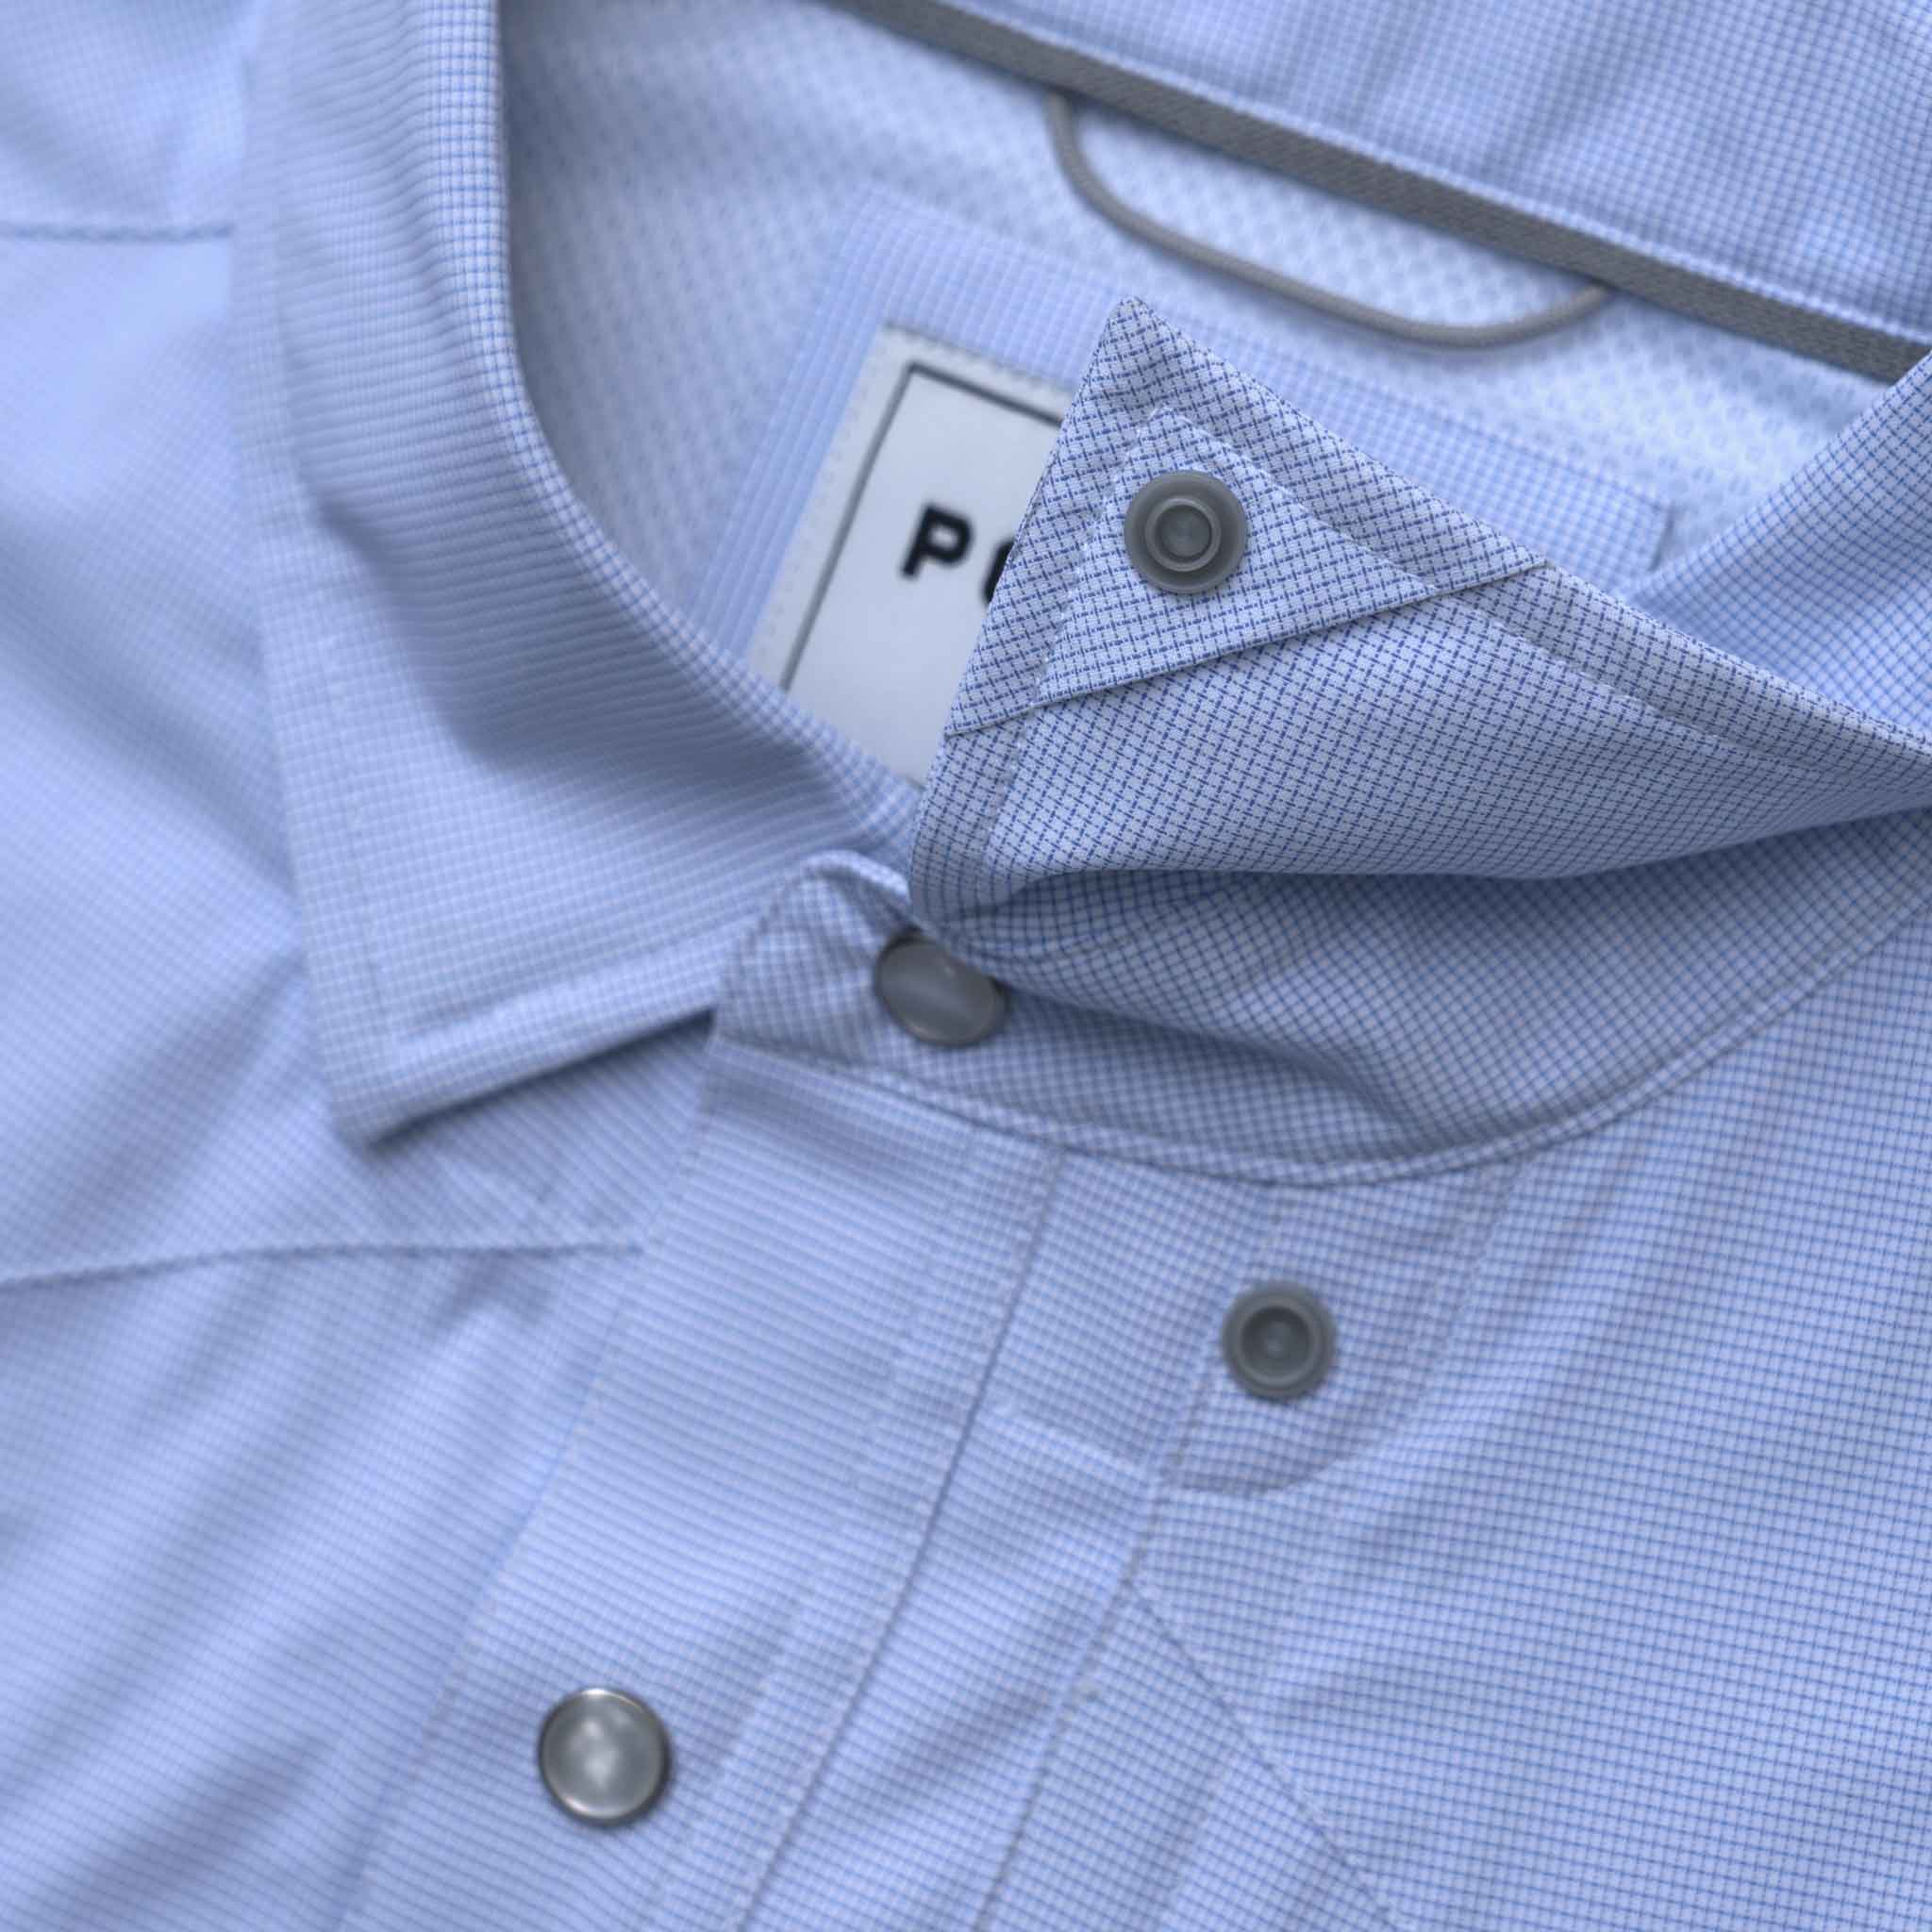 Close up image of the collar snaps on the blue microcheck shirt